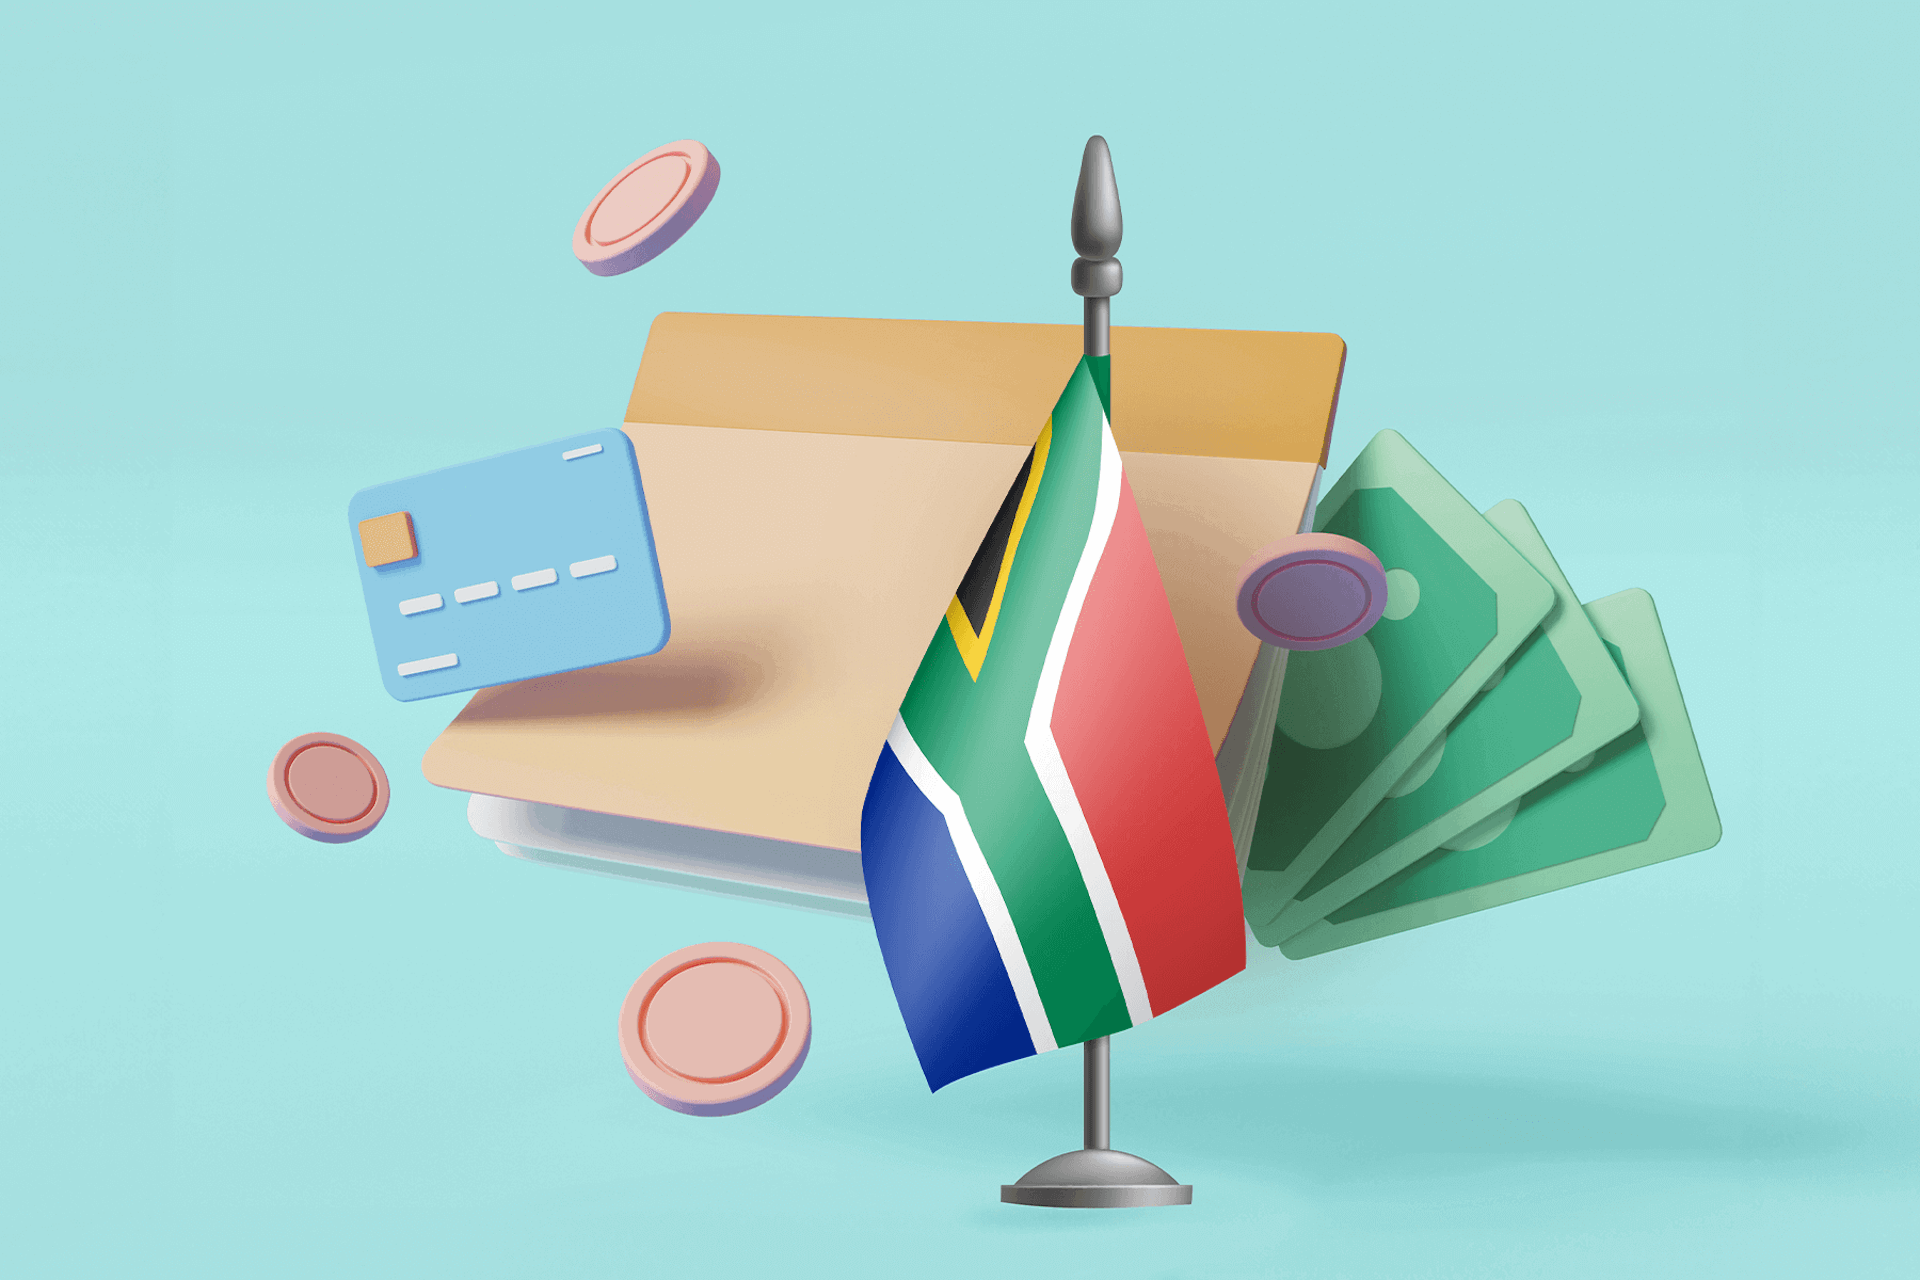 3D illustration of the South African flag with items from the financial services industry around it